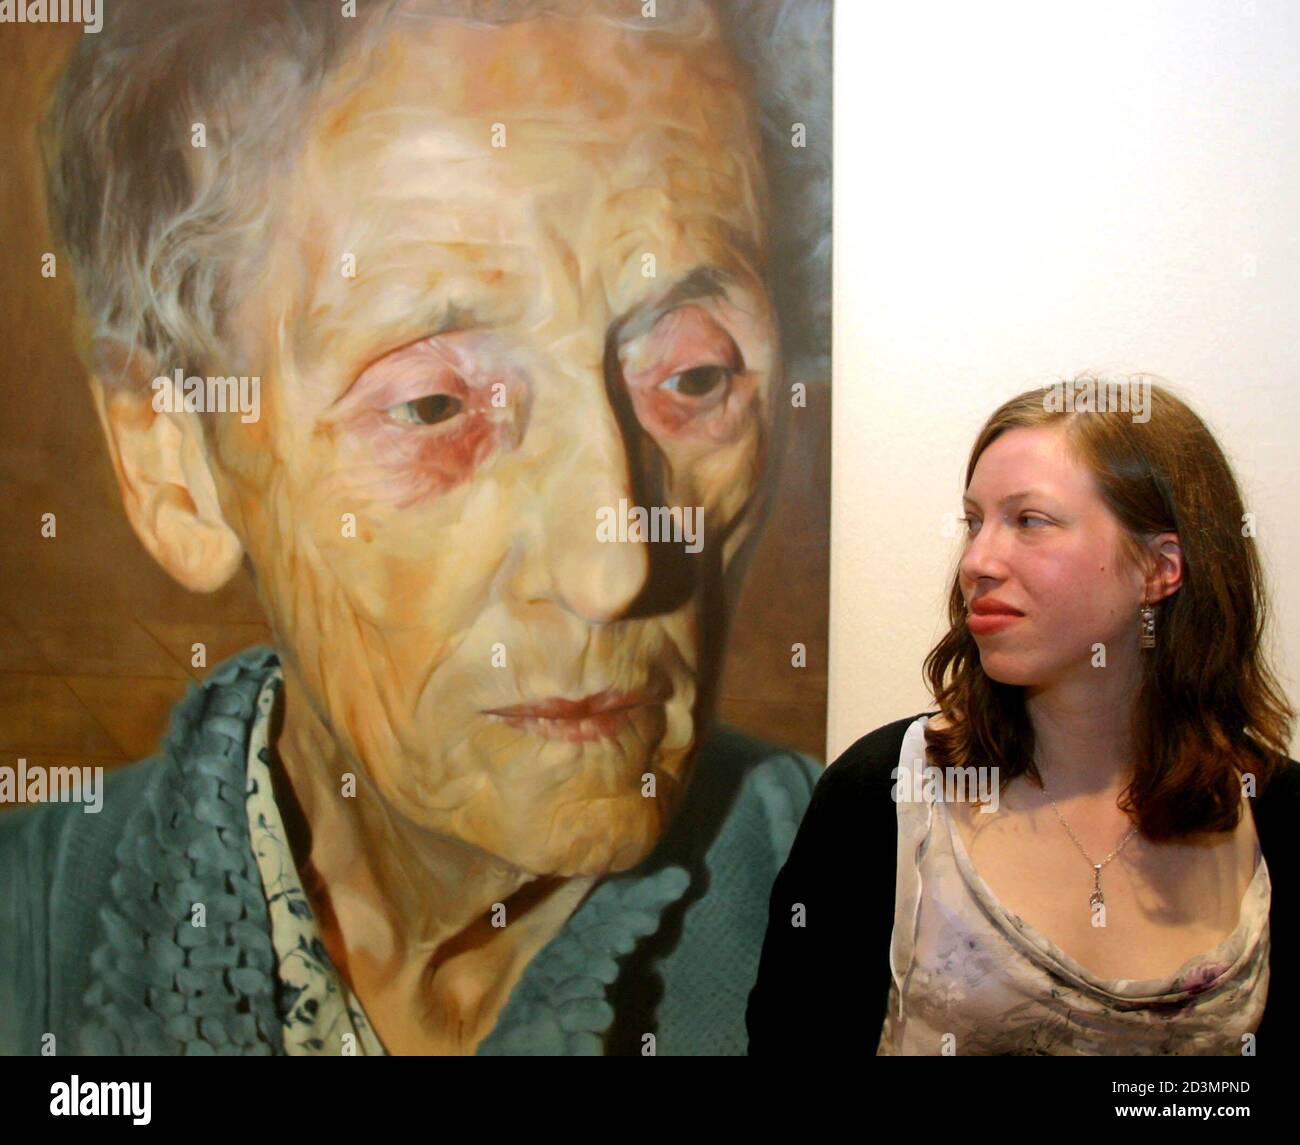 Charlotte Harris, winner of the 2003 BP Portrait Award, stands next to her untitled oil on canvas at the National Portrait Museum in London June 10, 2003. The 21-year old student was announced as the 25,000 pound sterling winner of the award on Tuesday night with her painting of her grandmother Doris Davis. REUTERS/Matt Dunham  MD/JDP Stock Photo